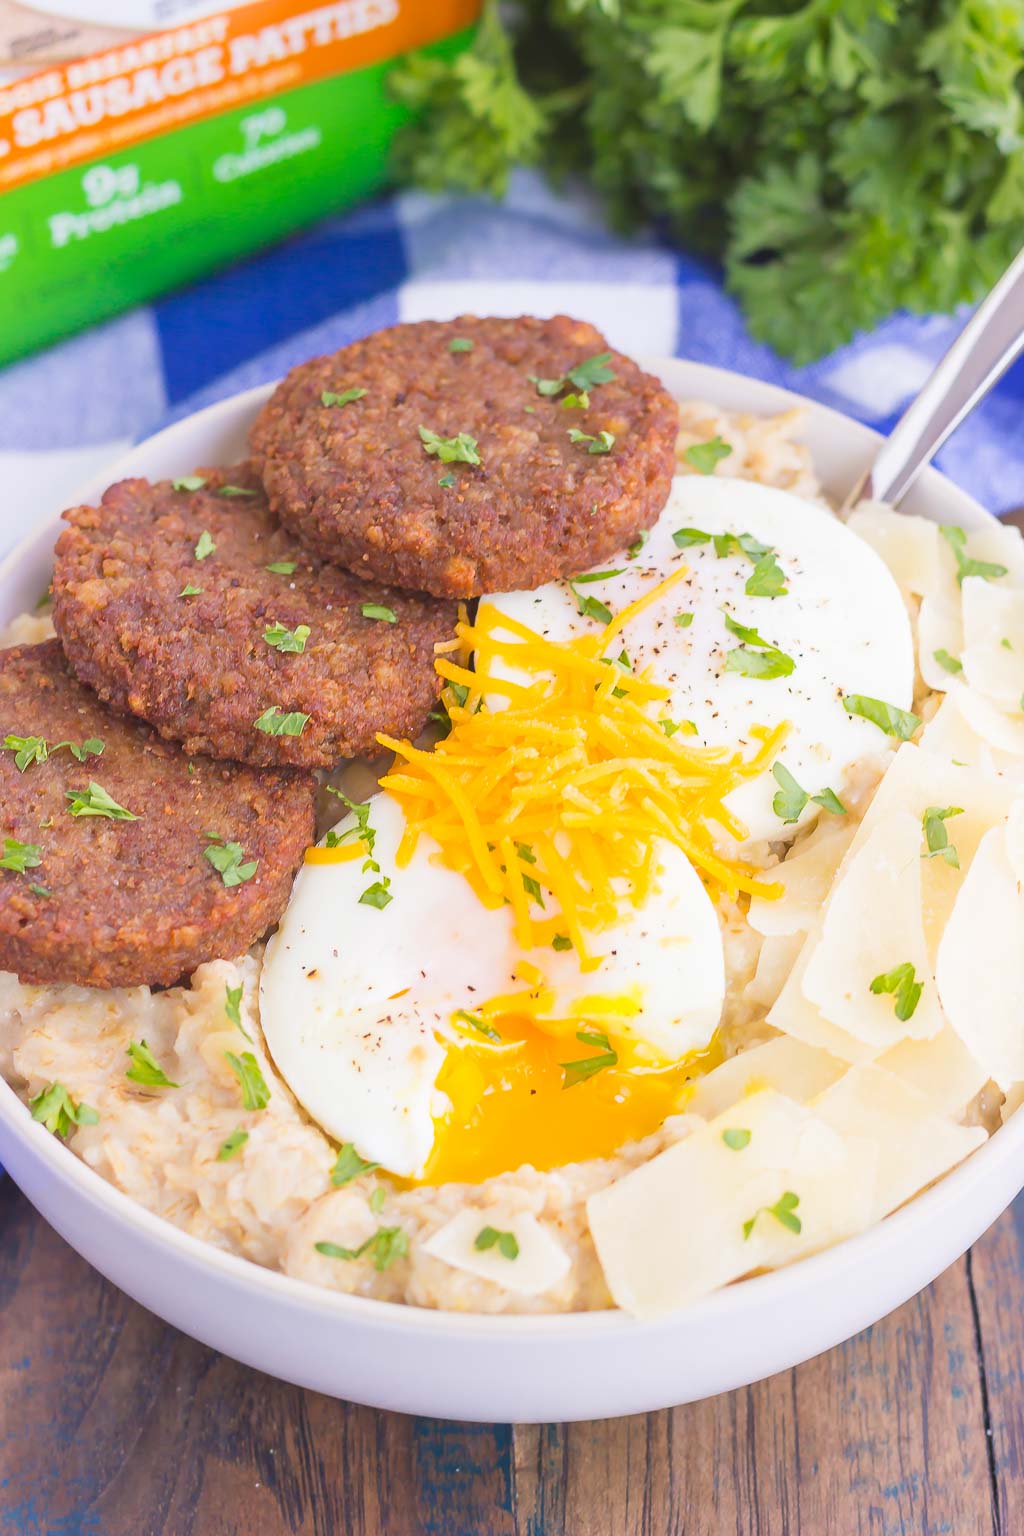 Savory Parmesan Oatmeal is a delicious way to switch up your breakfast routine. Packed with hearty oats, fresh Parmesan cheese and veggie sausage, this simple dish is a great option for when you want a warm and comforting meal! #oatmeal #savoryoatmeal #oatmealbowl #breakfast #easybreakfast #heartybreakfast